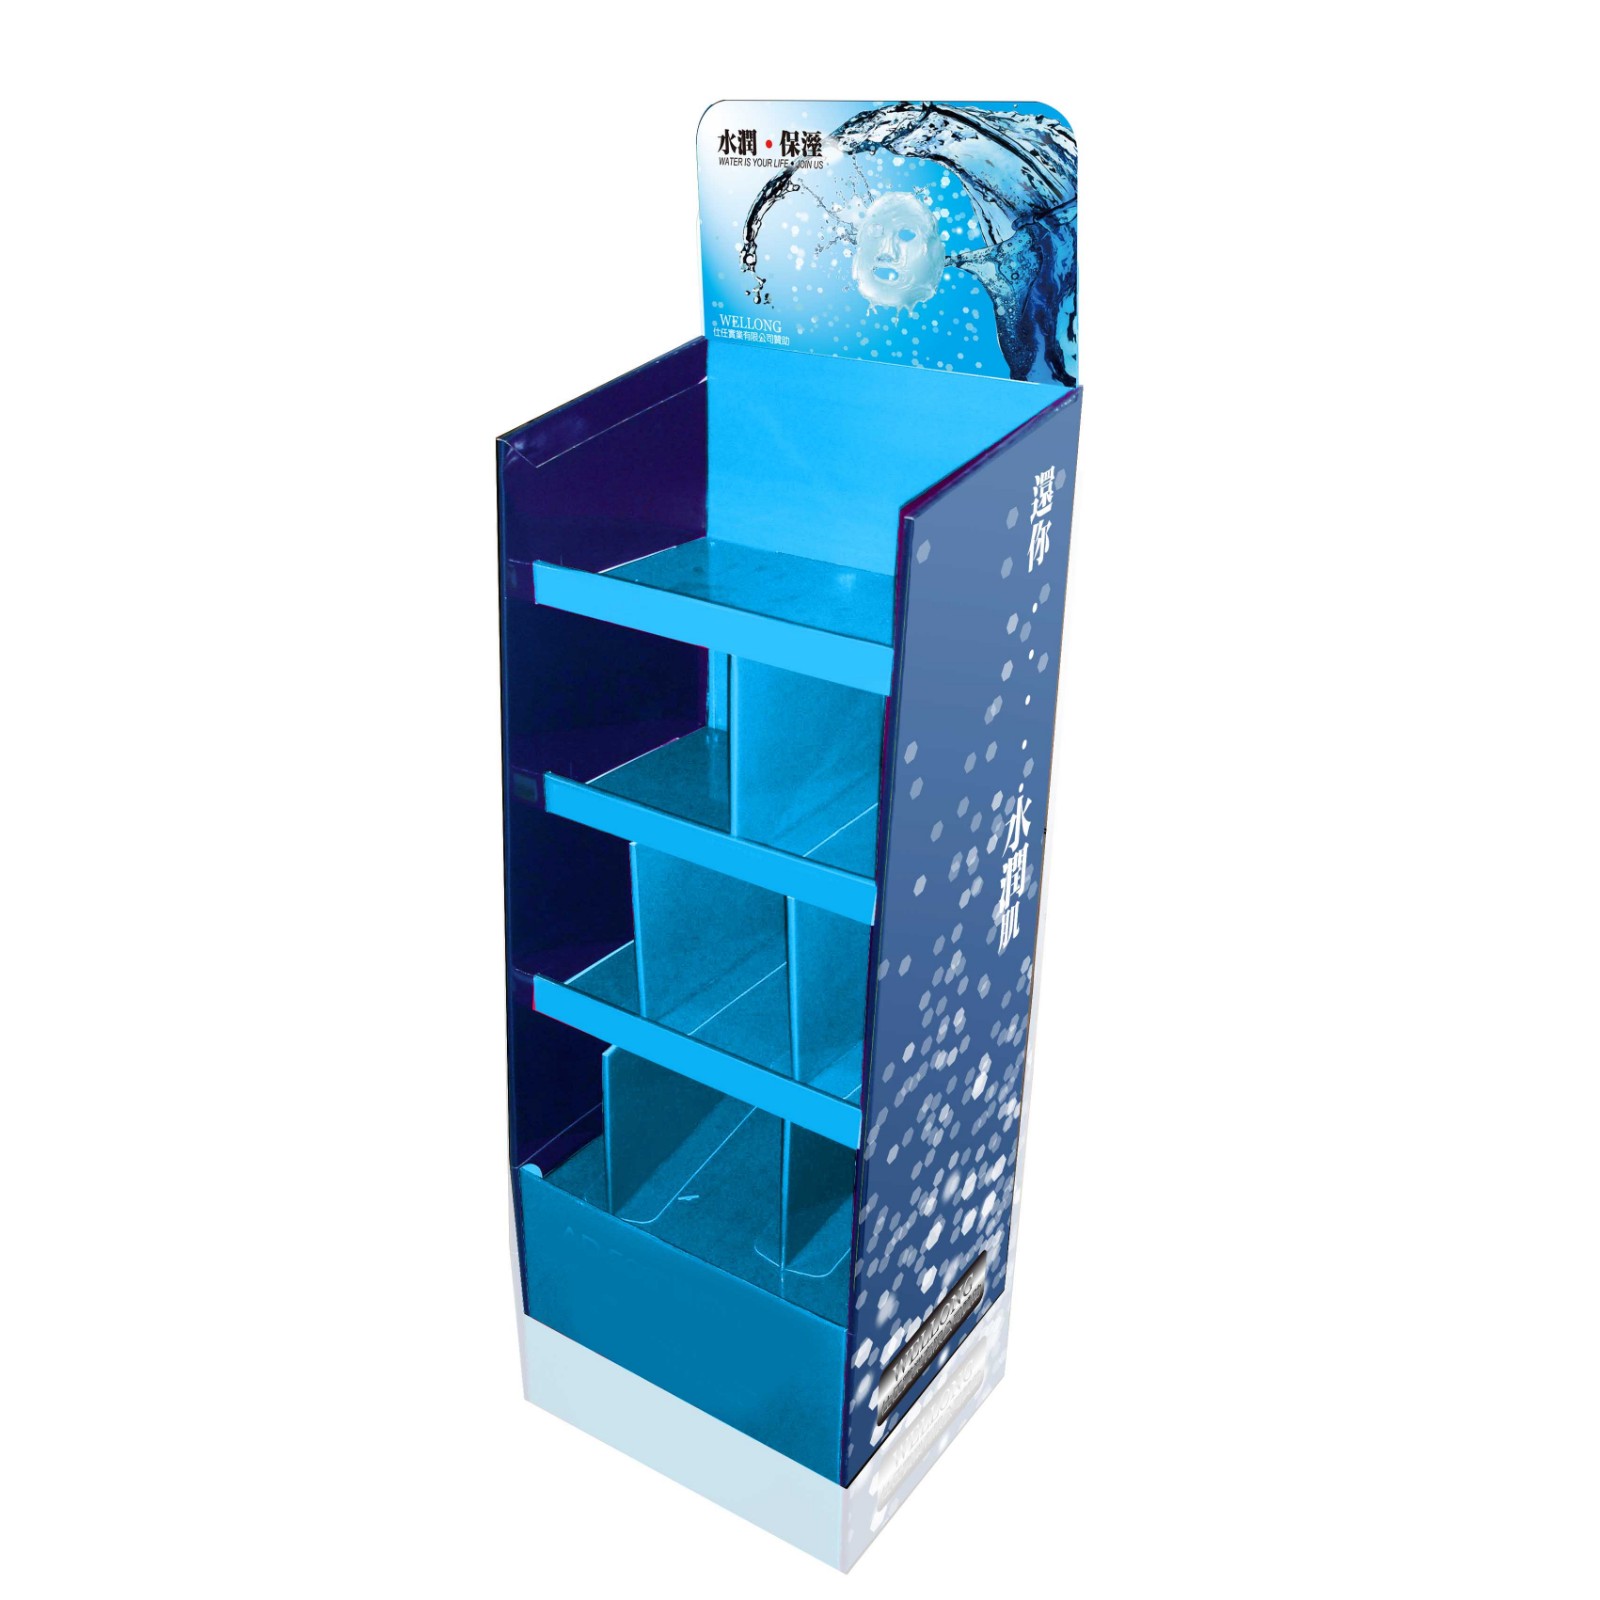 A-15 Floor display stand